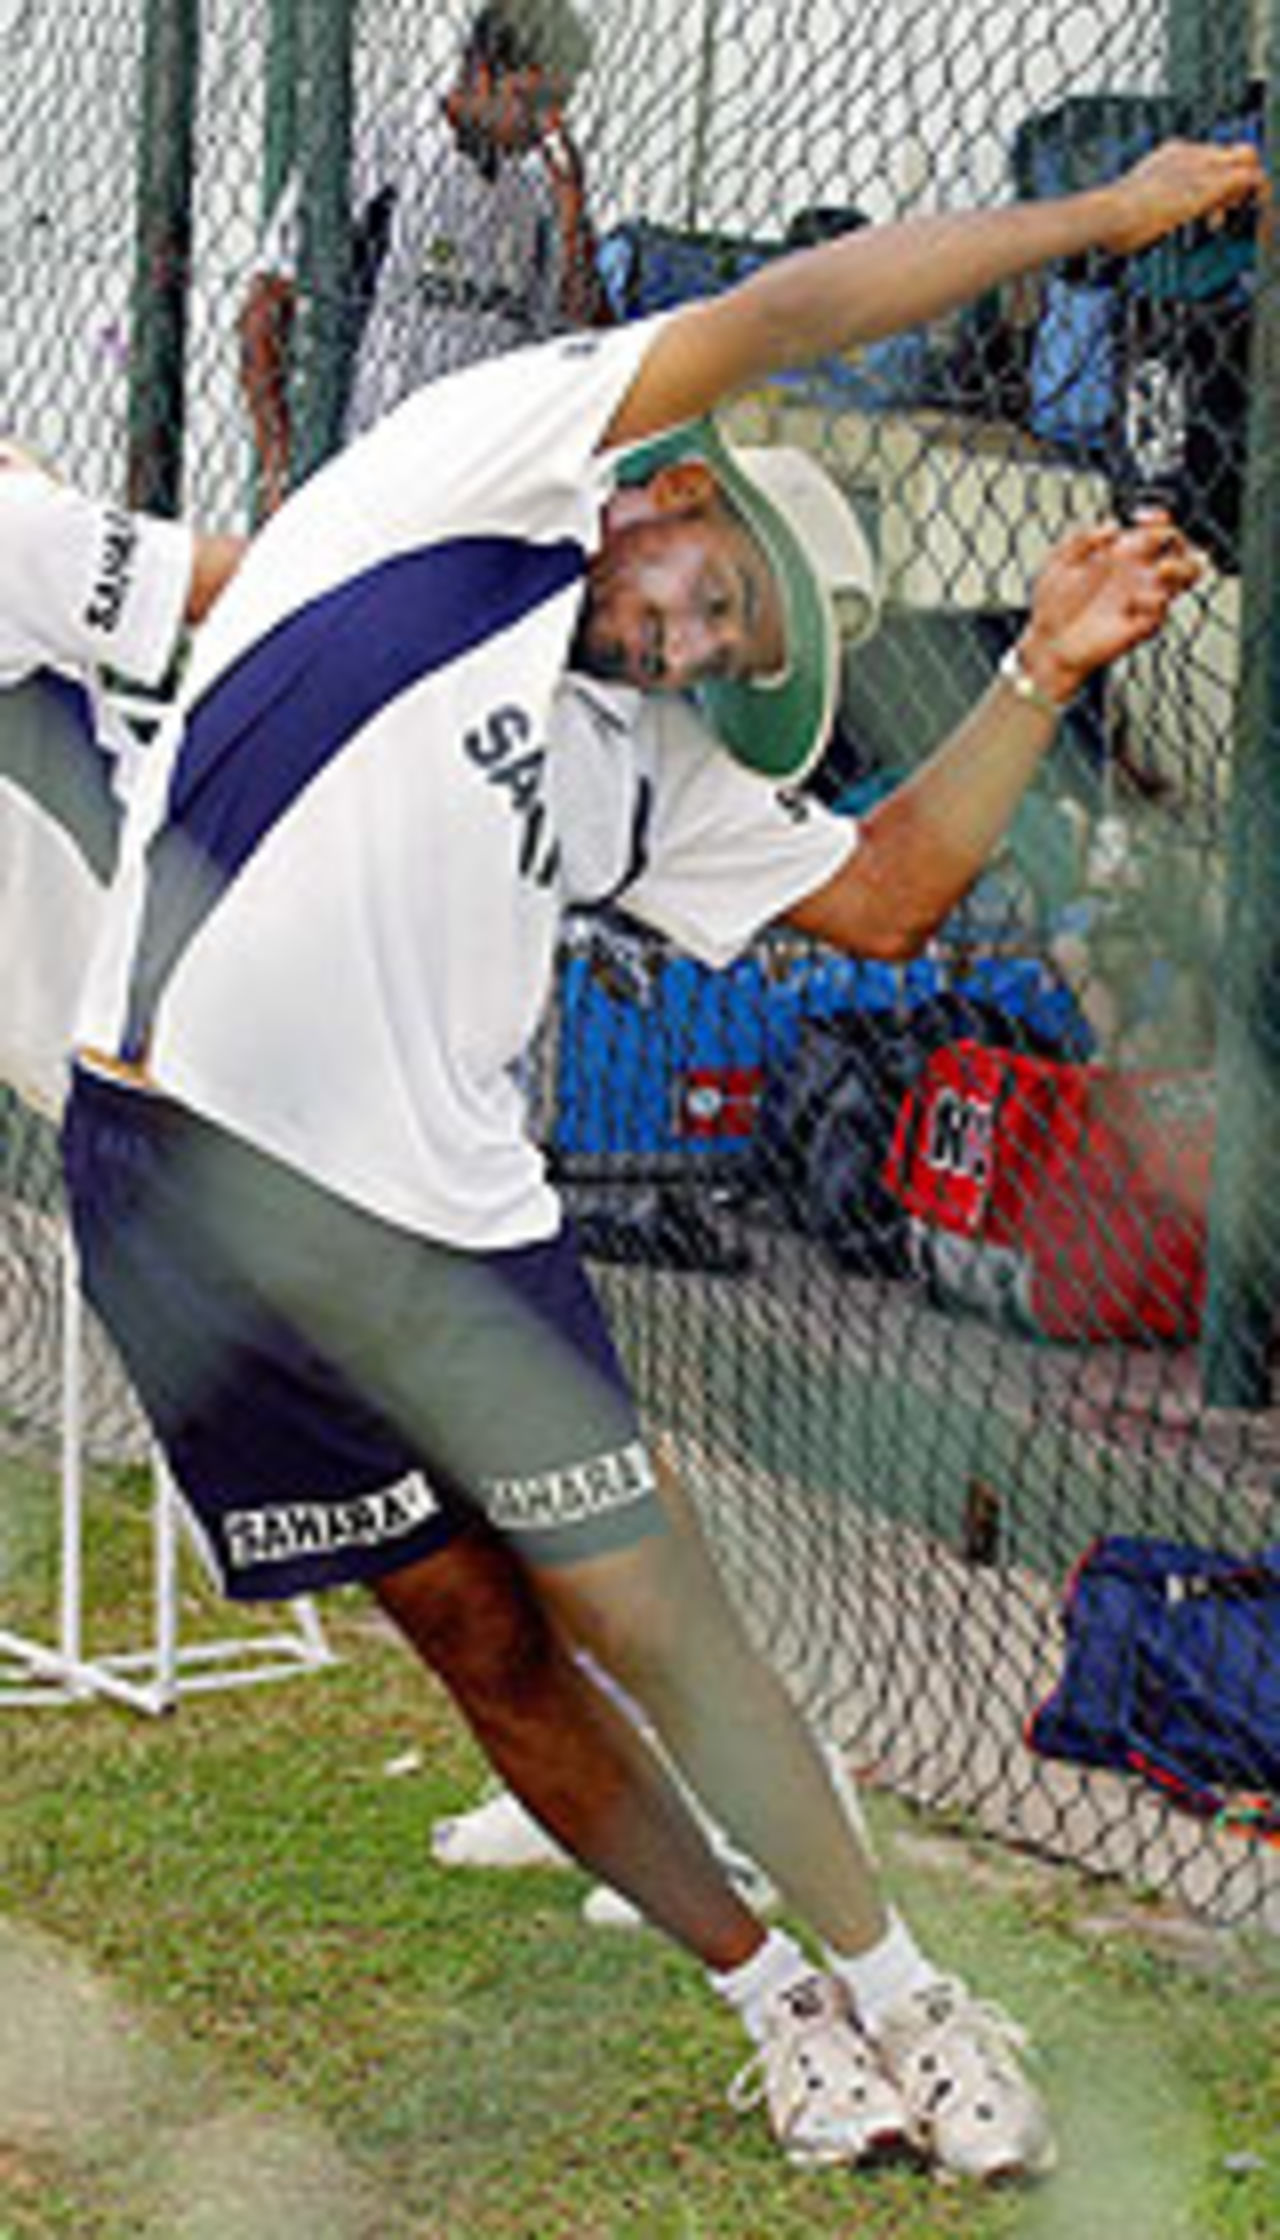 Harbhajan Singh stretches during practice, Colombo, July 30, 2004